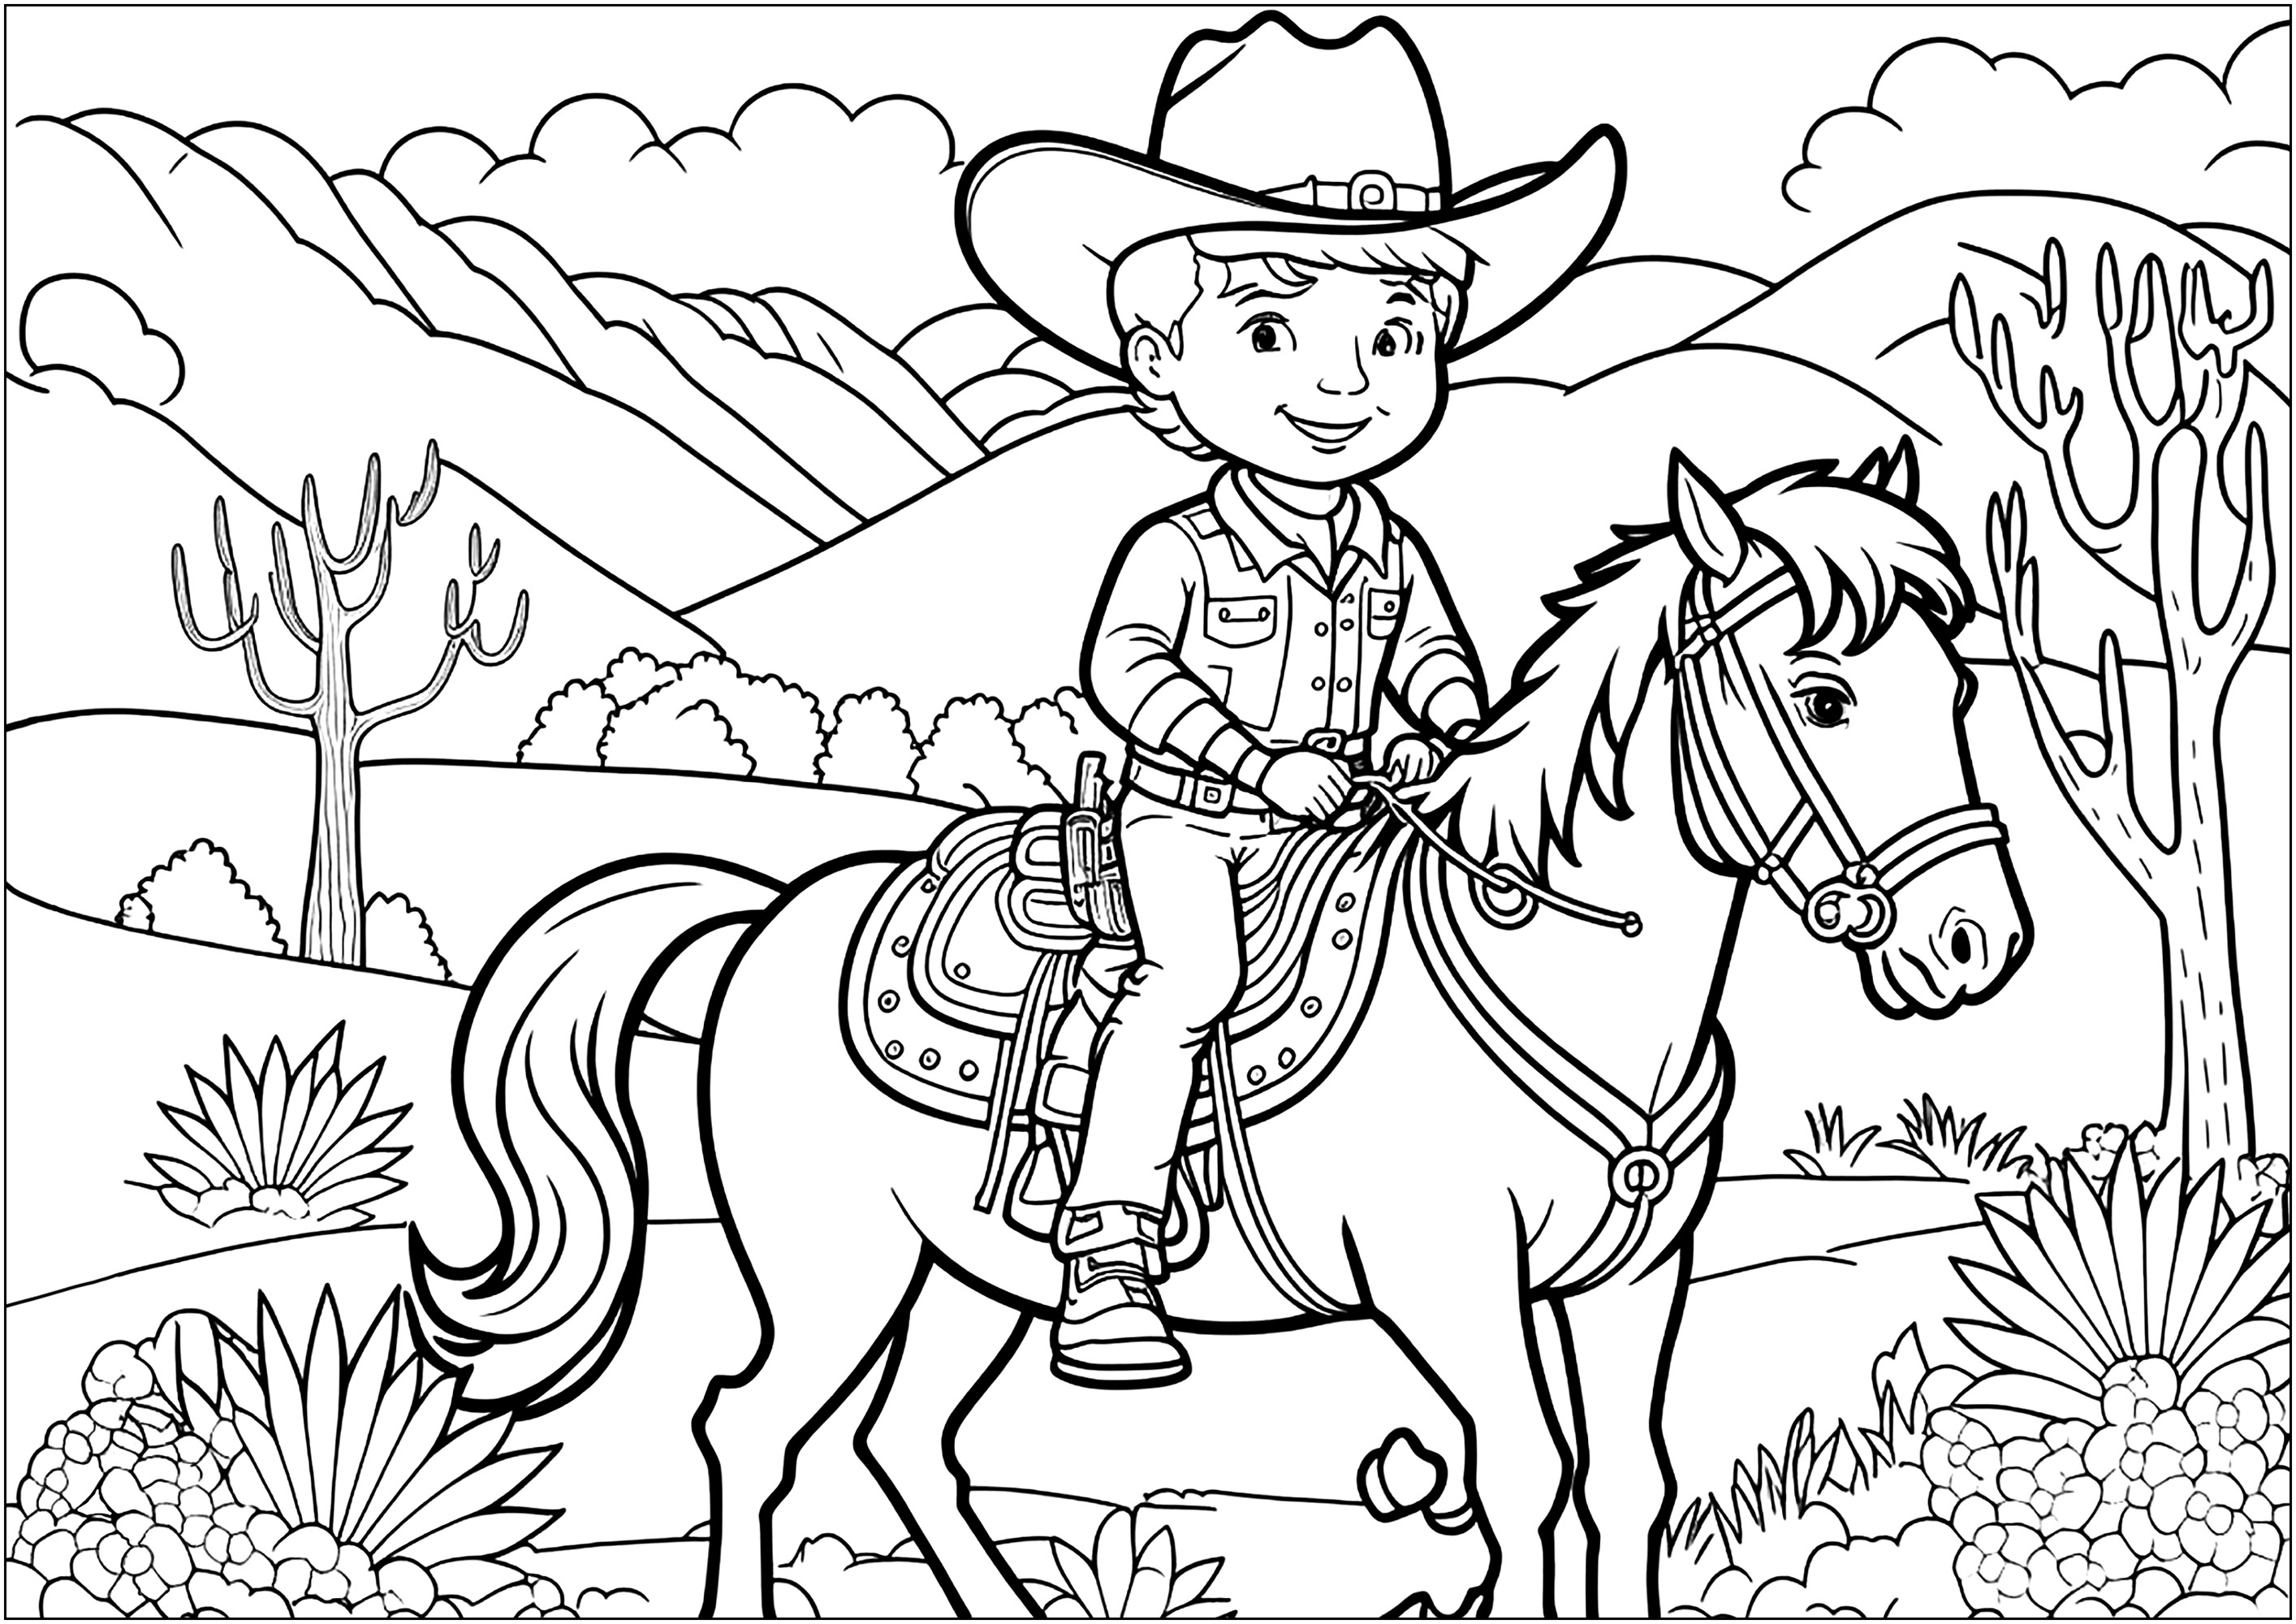 A proud Cowboy on his horse, in a landscape resembling those of westerns